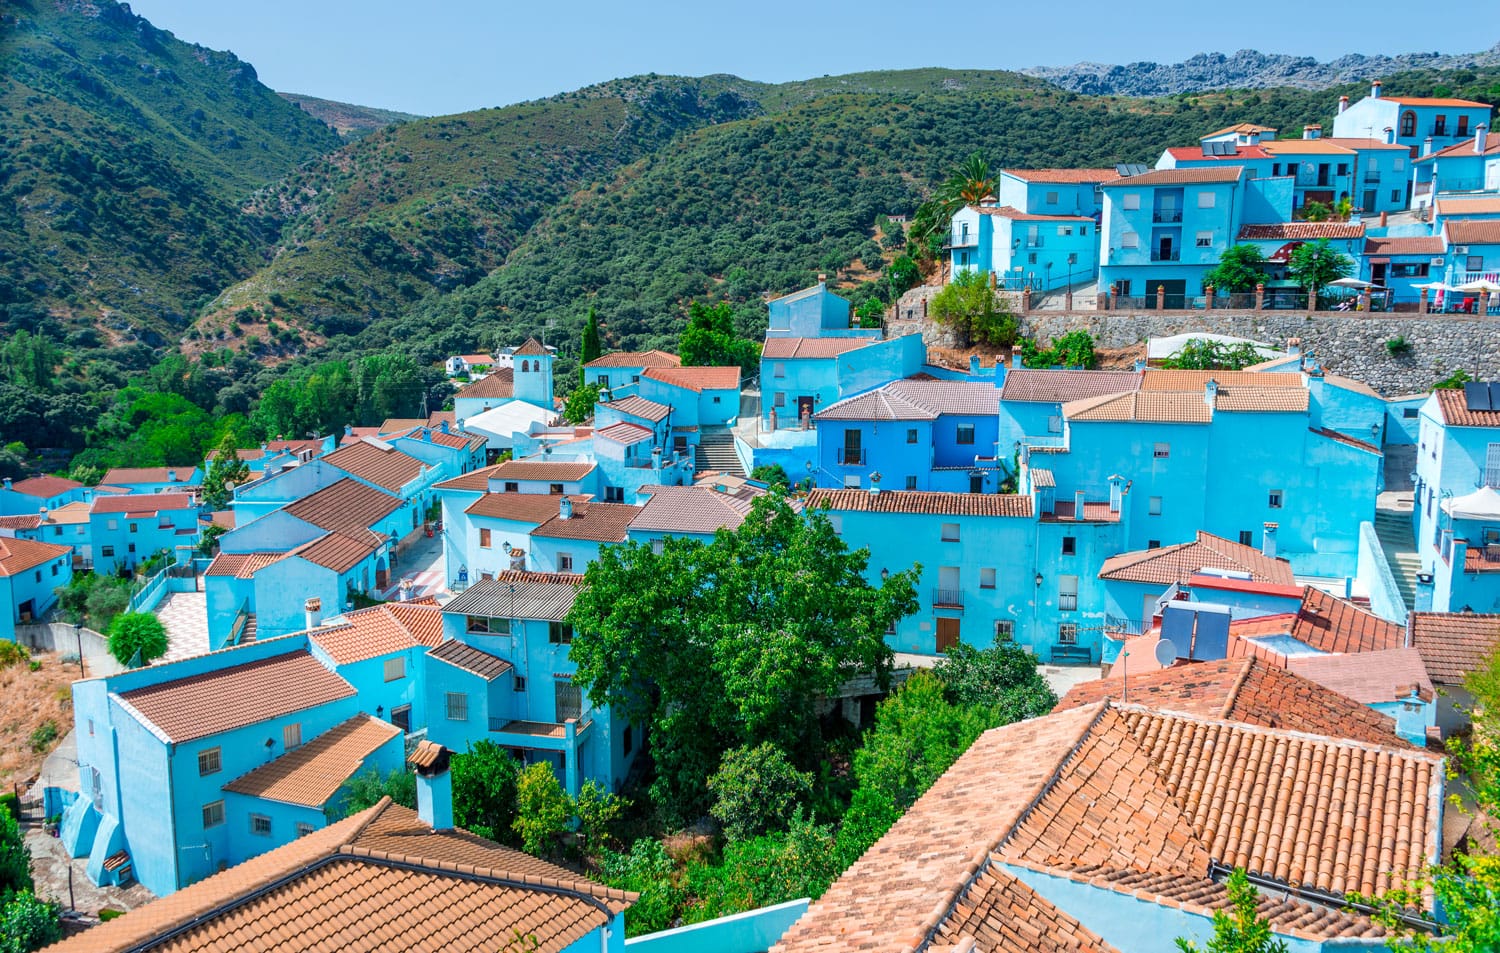 Juzcar the Smurf village, famous village of Andalucia